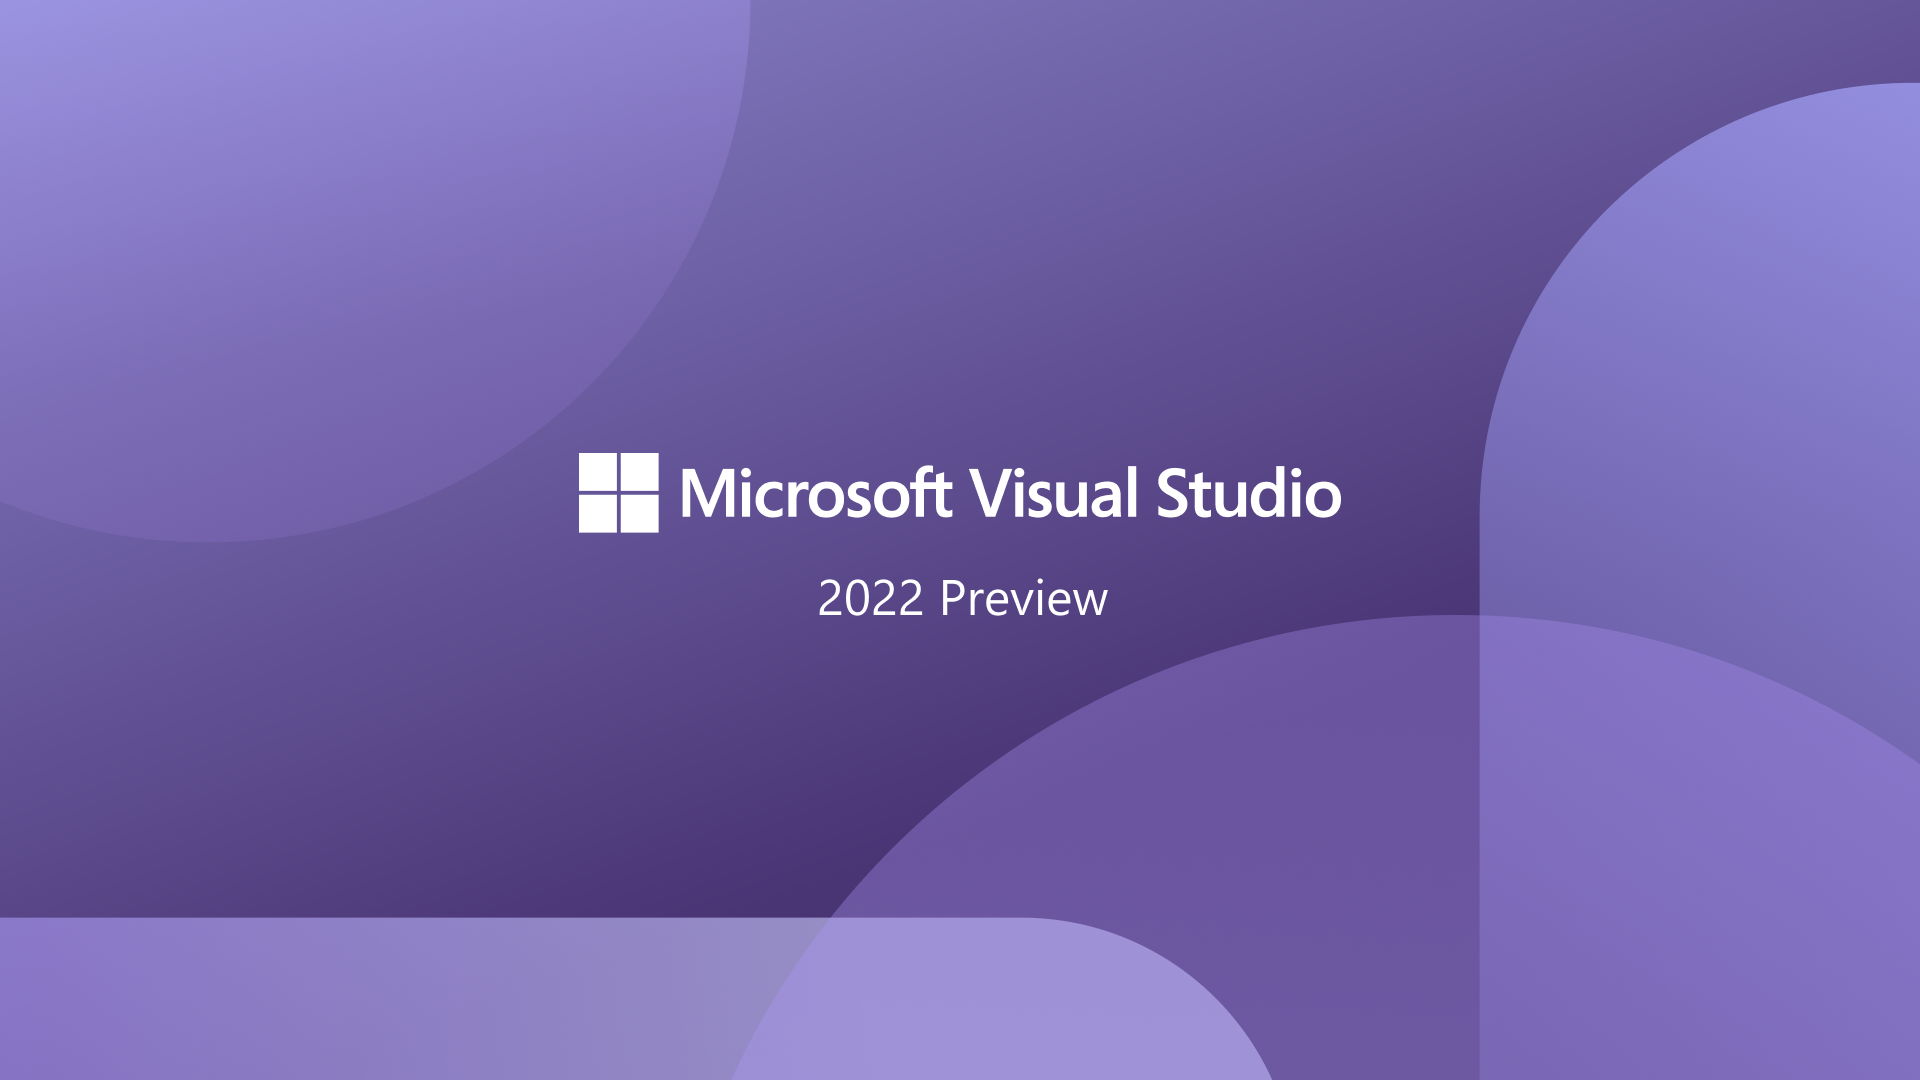 difference between visual studio for mac and visual studio for windows